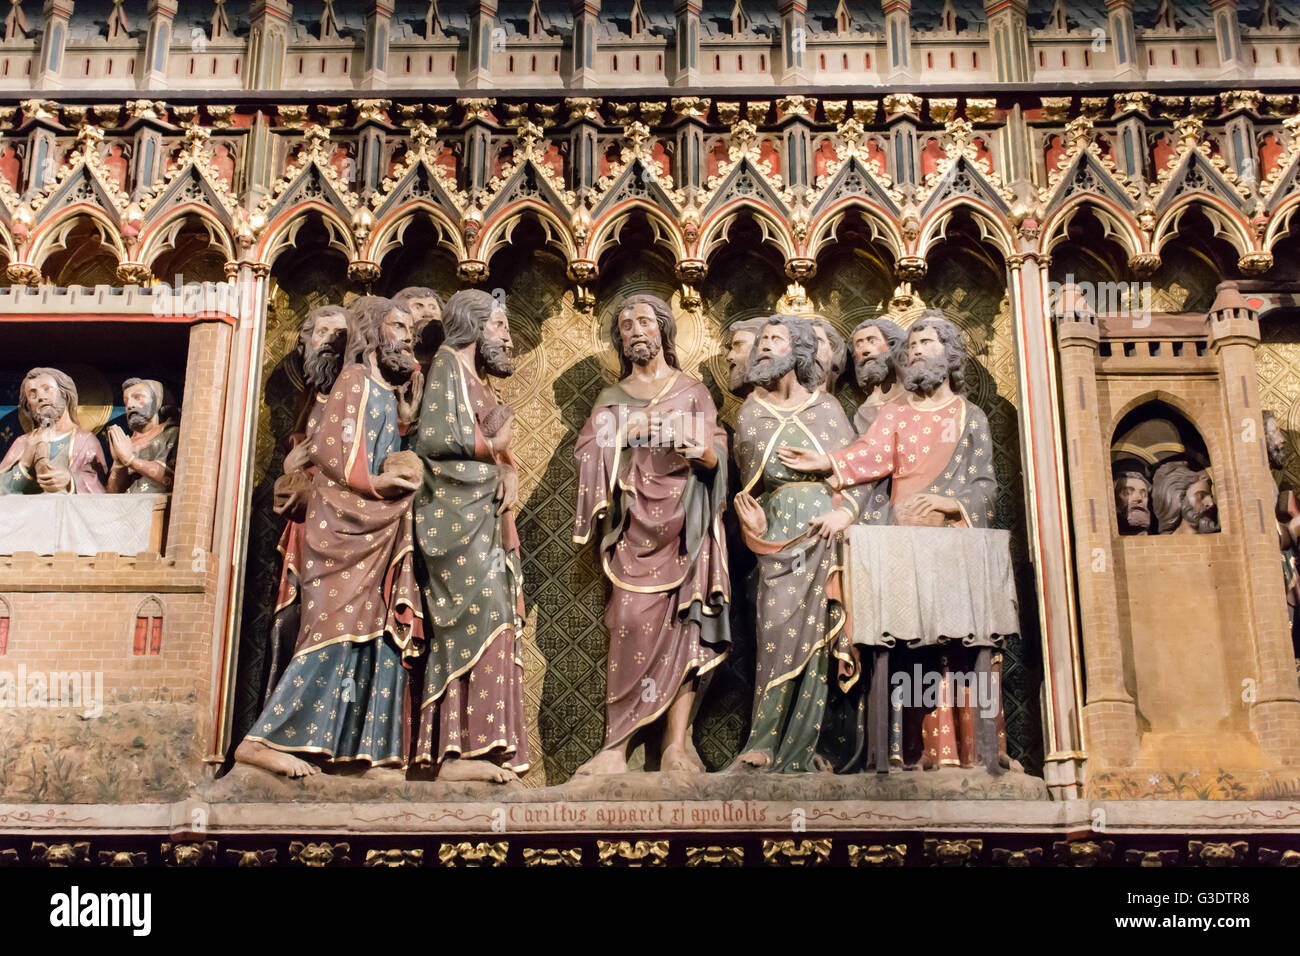 Wooden carving of Christ appearing to his disciples. Cathedral of Notre Dame, Paris, France. Stock Photo